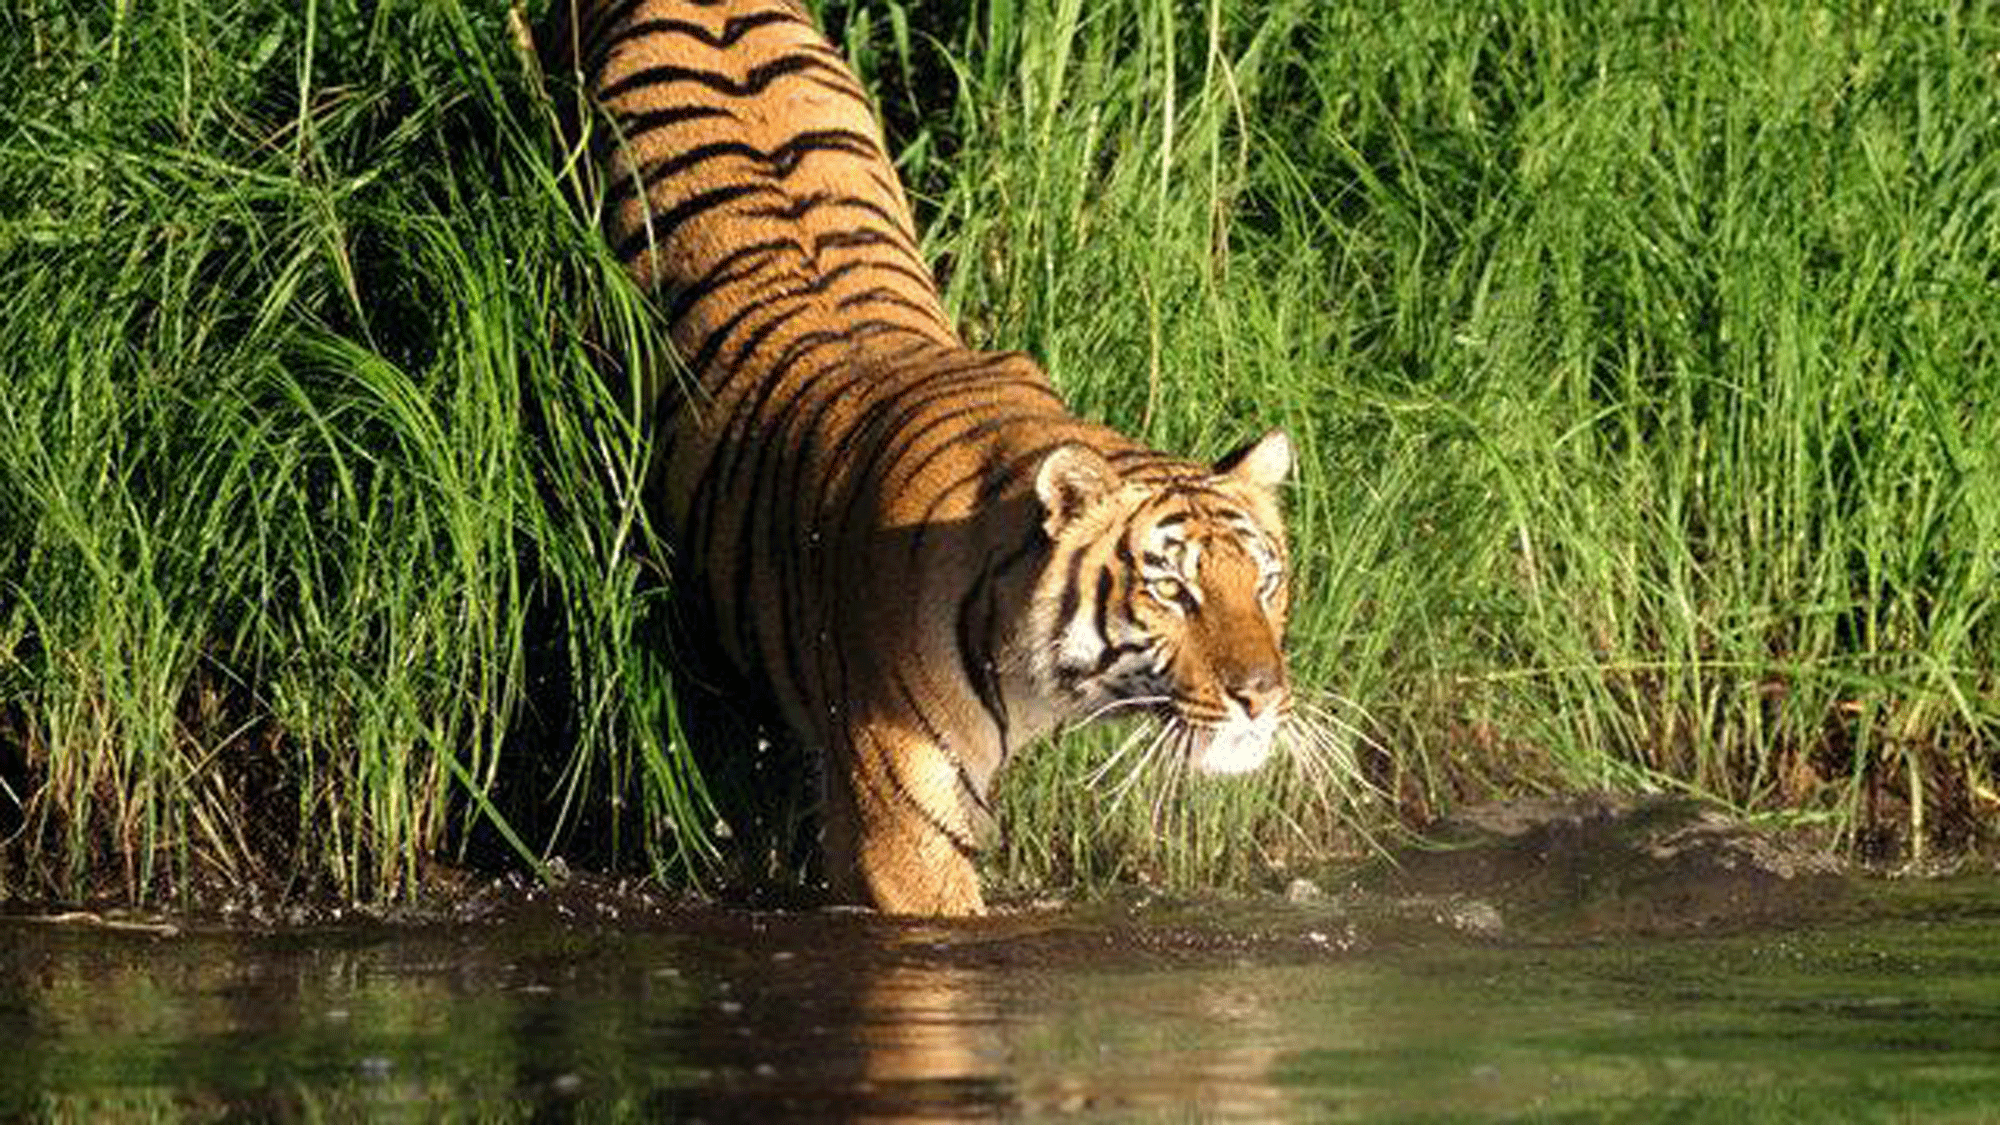 A tiger in the  Sunderban mangrove forest. (Photo Courtesy: <a href="https://www.facebook.com/omega.tiger.1/?fref=photo">Omega Tiger/Facebook</a>)